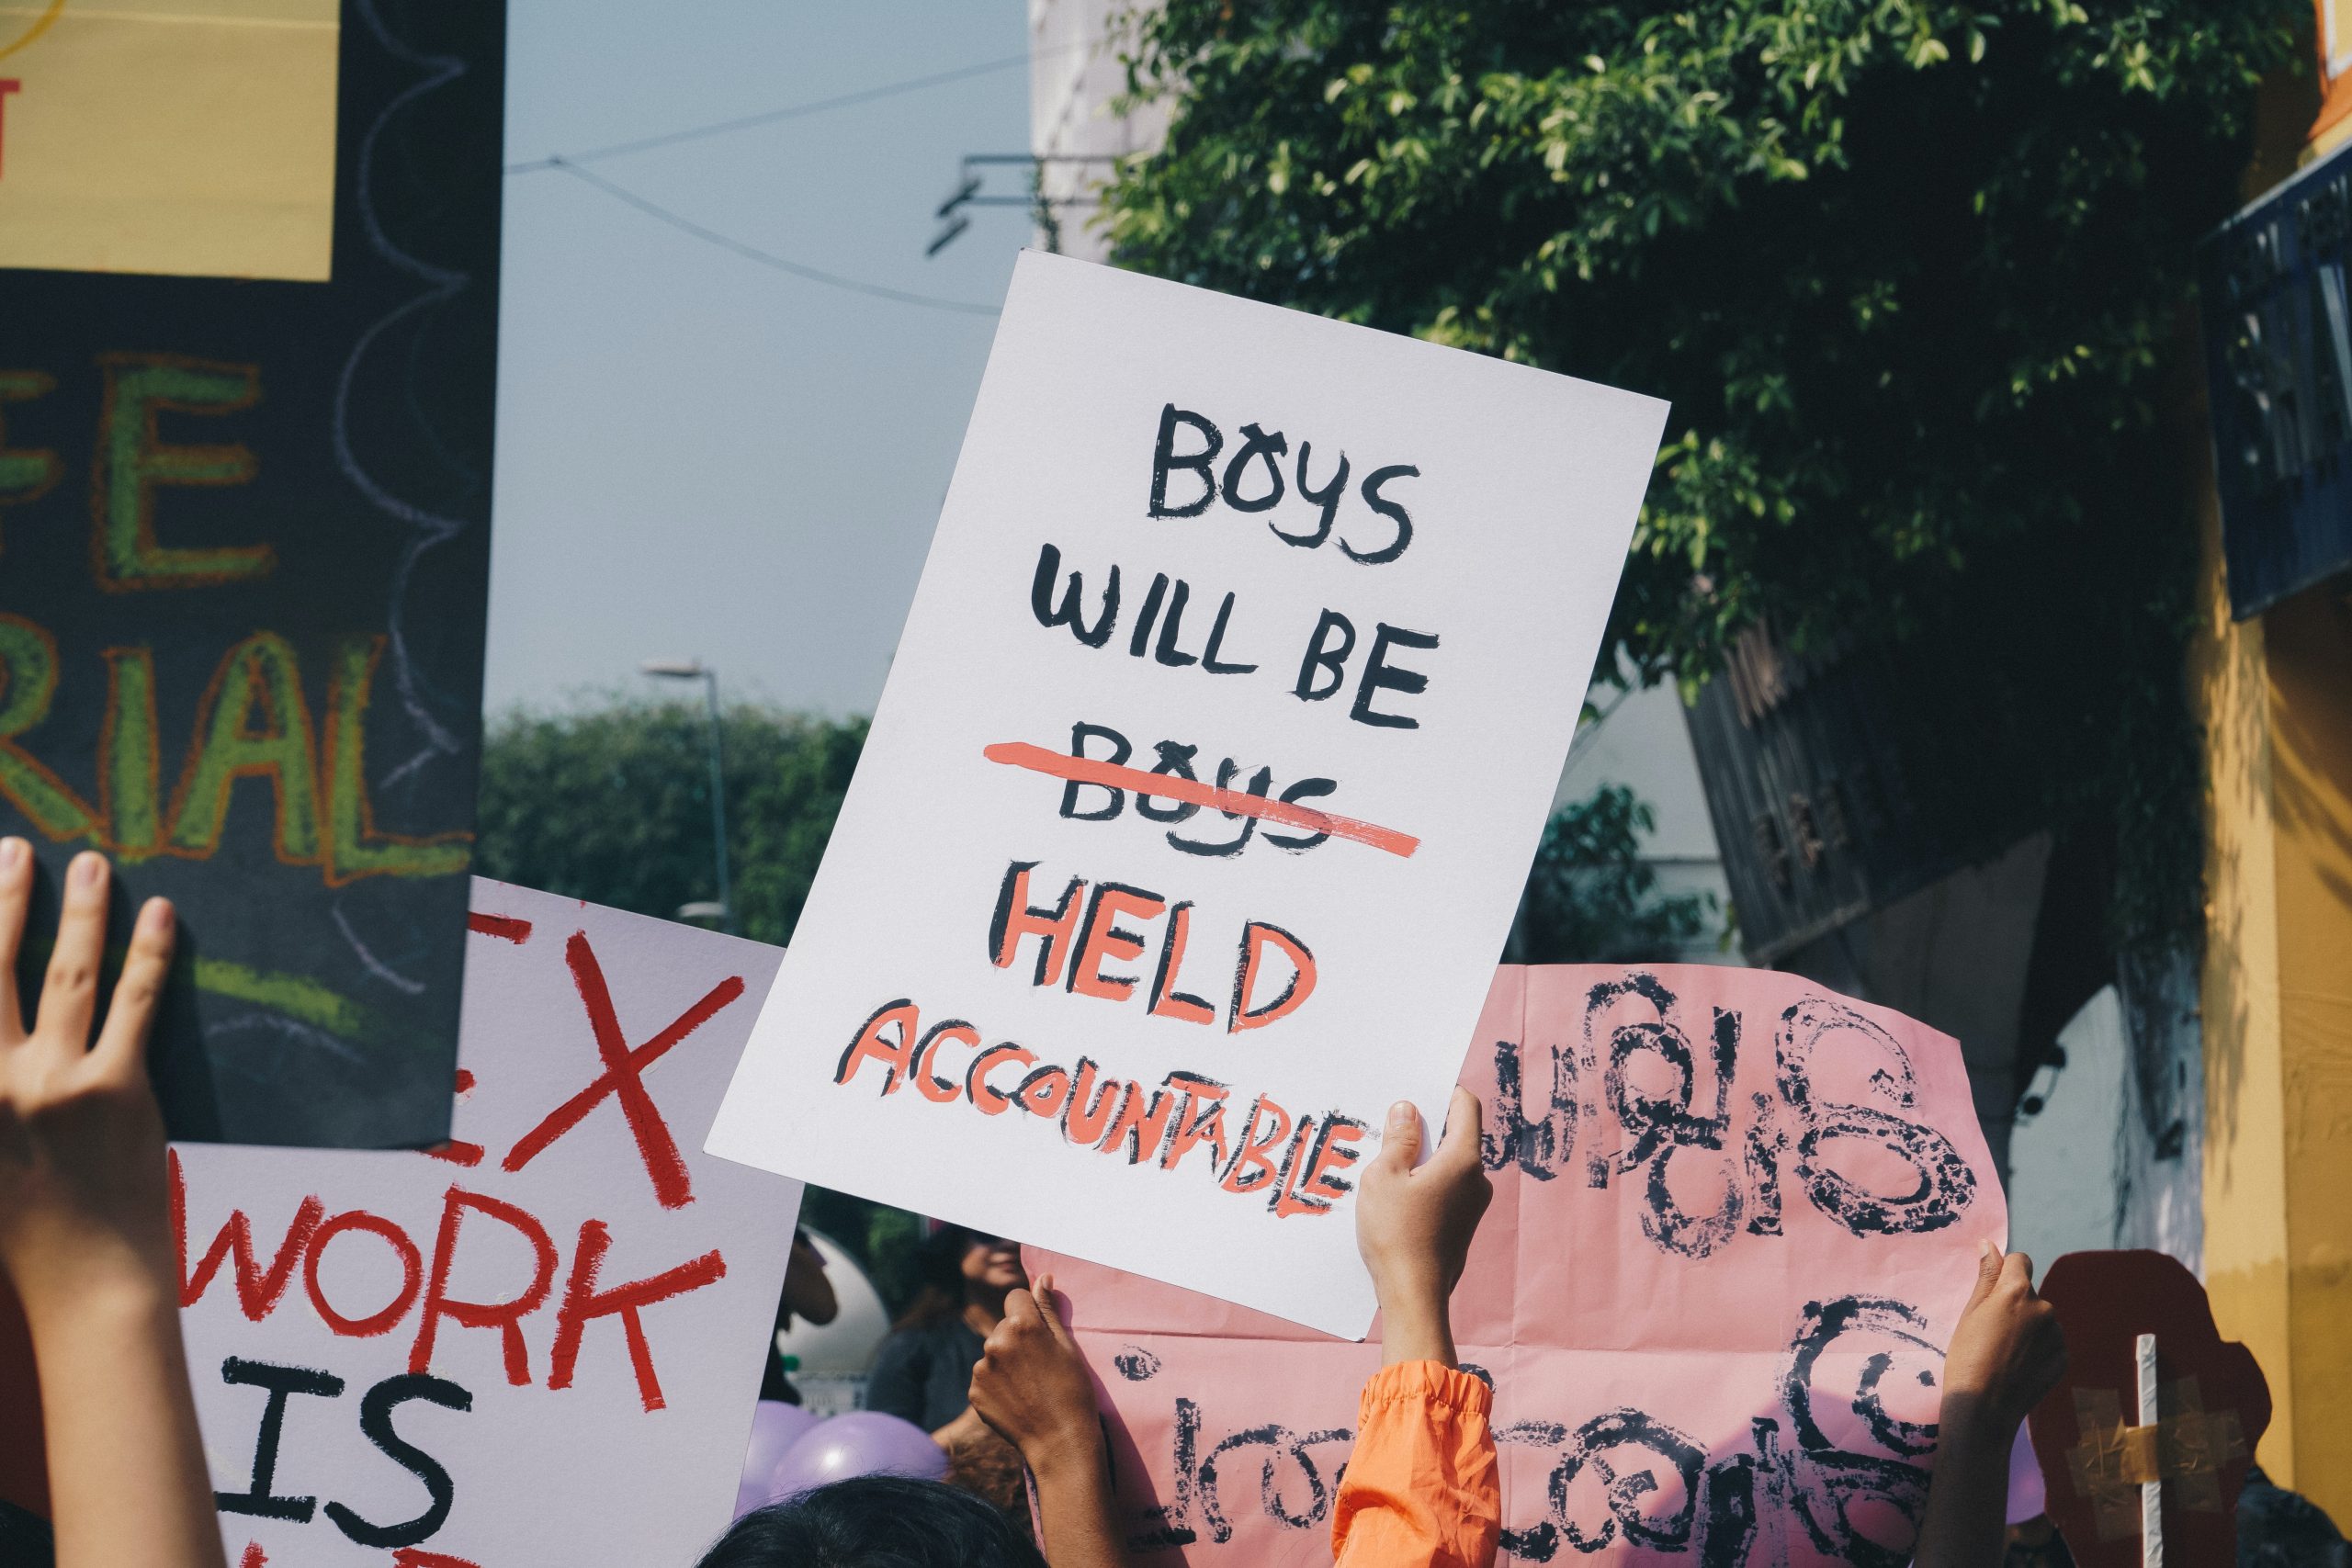 A woman holds a sign above a crowd that reads "boys will be held accountable"